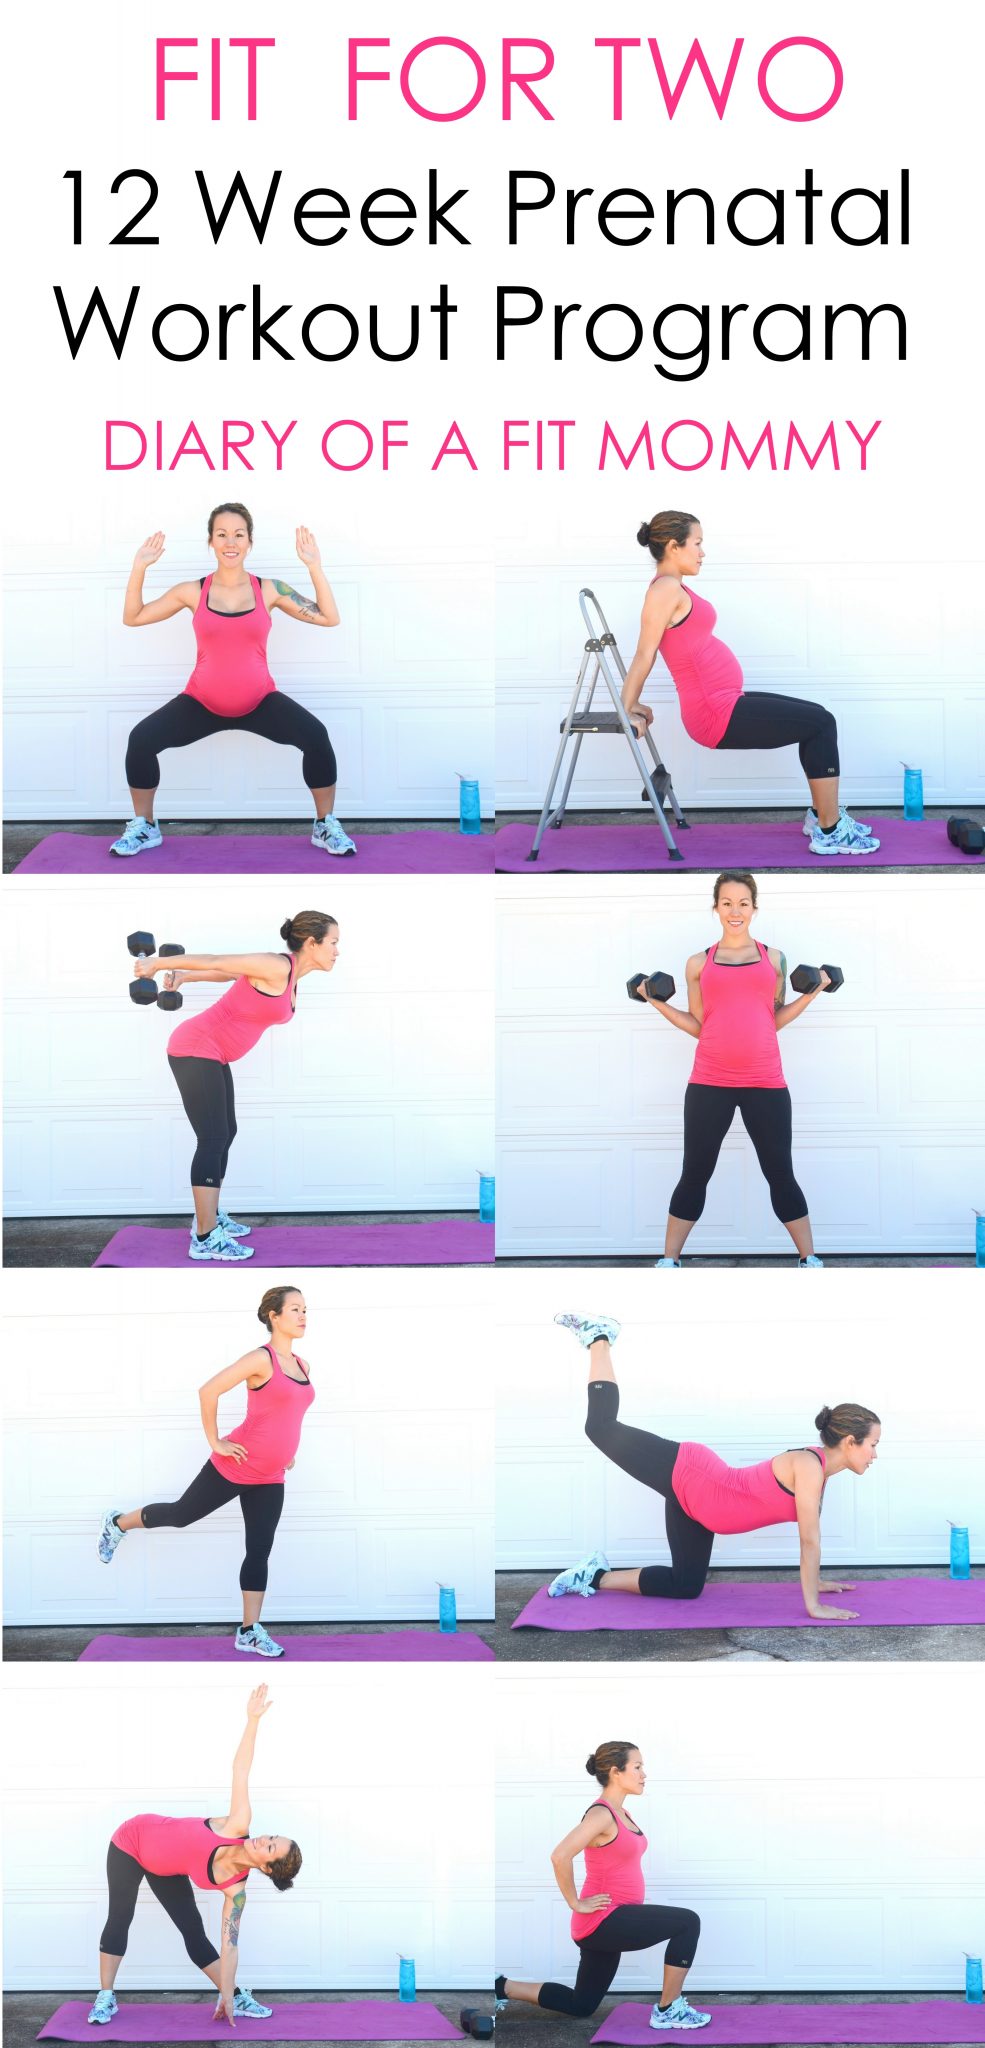 Safe And Effective Abdominal Exercises For Every Trimester During